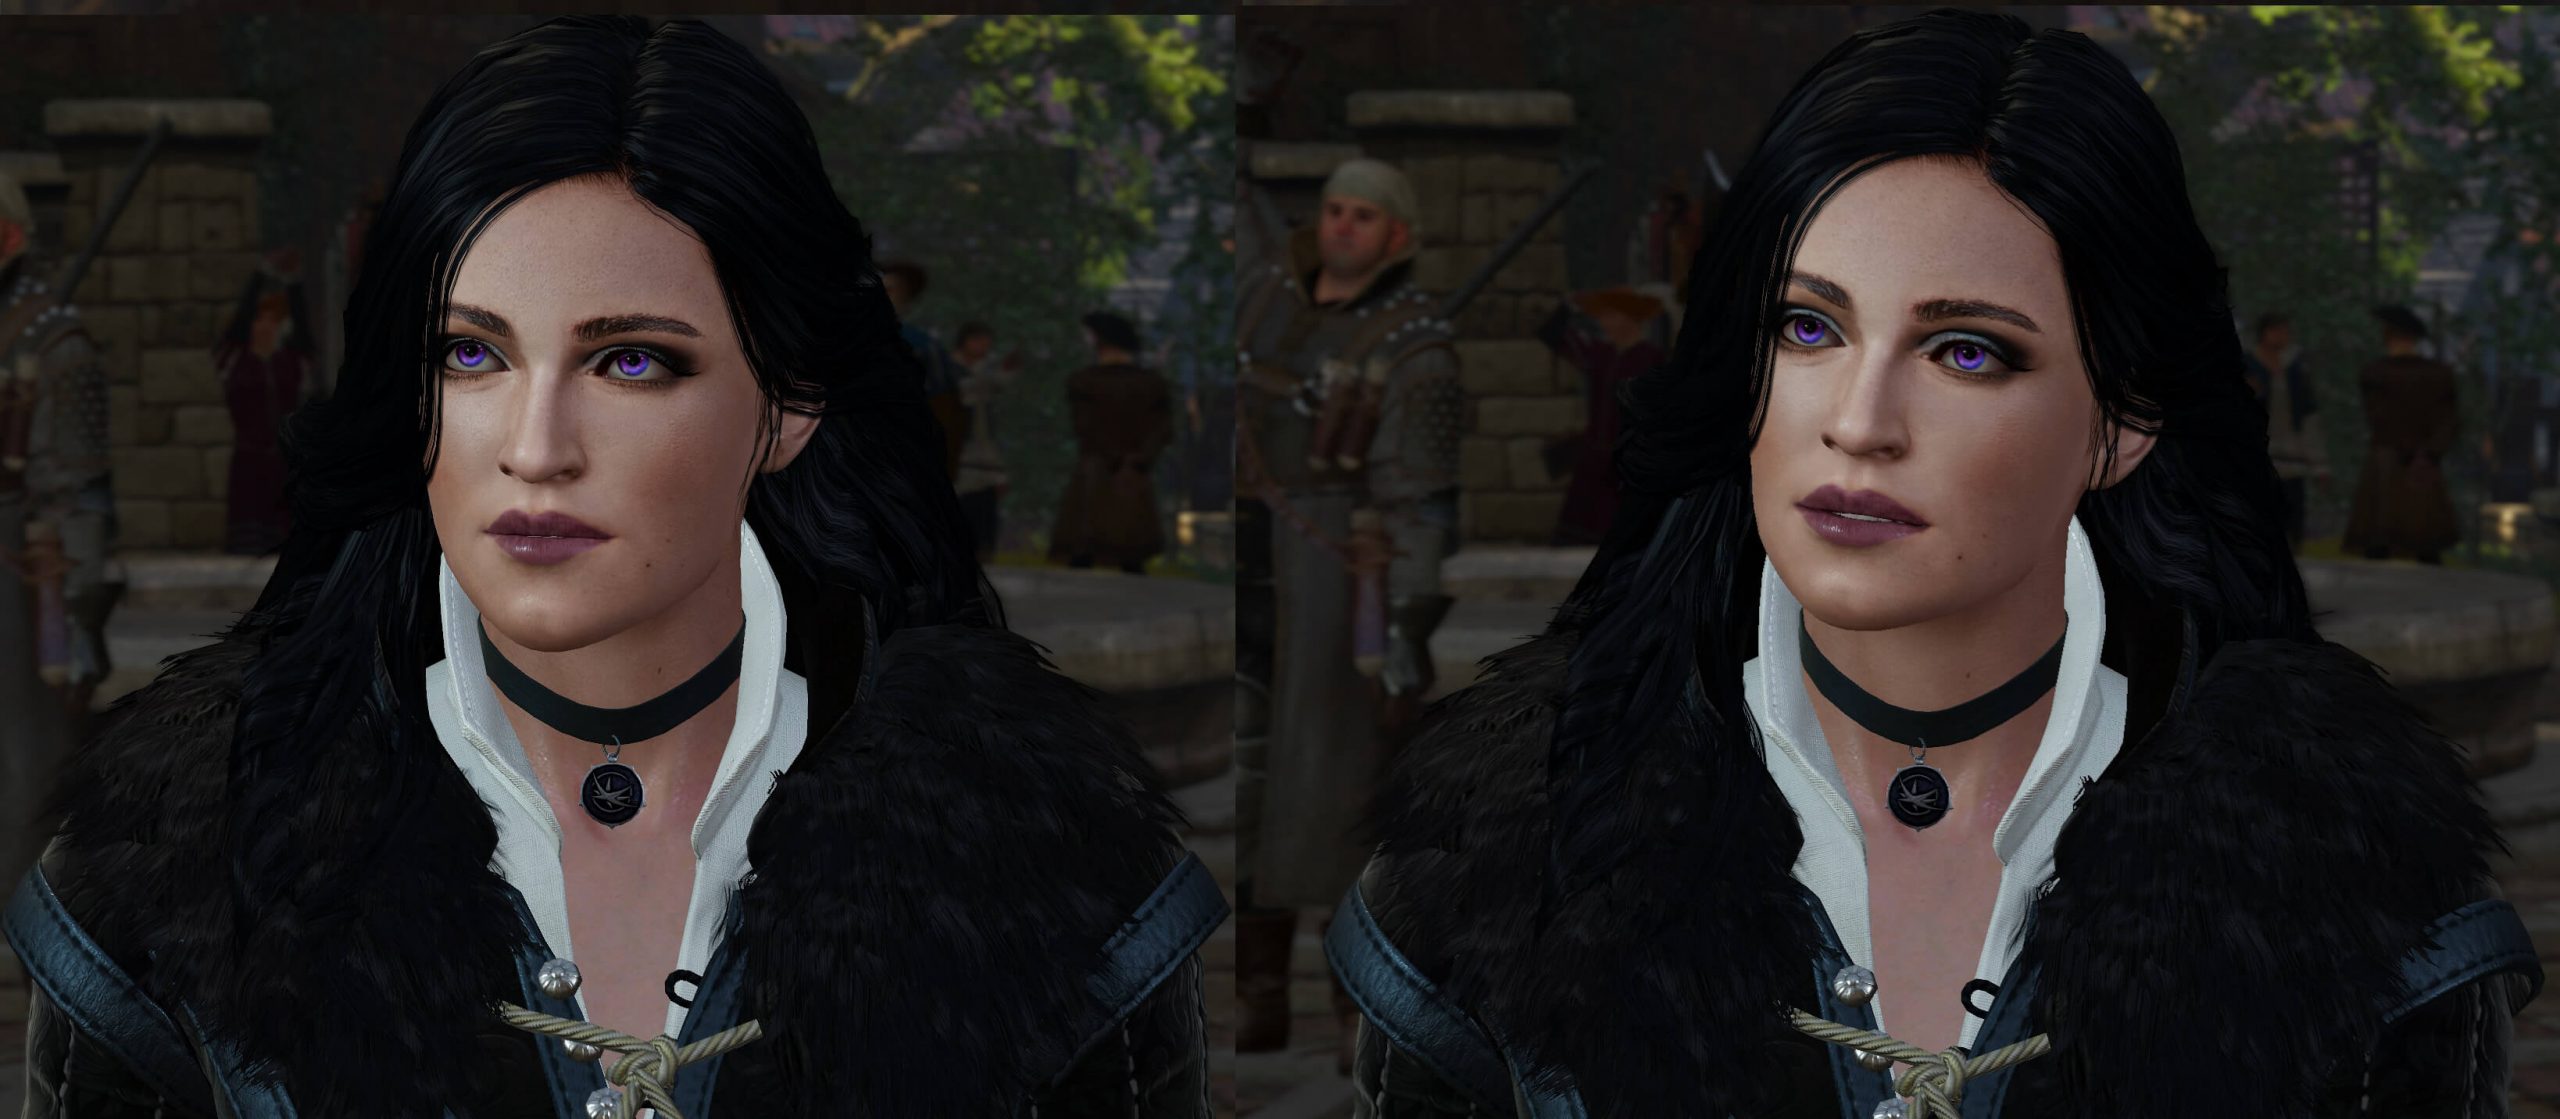 Yennefer of vengerberg the witcher 3 voiced standalone follower se фото 71